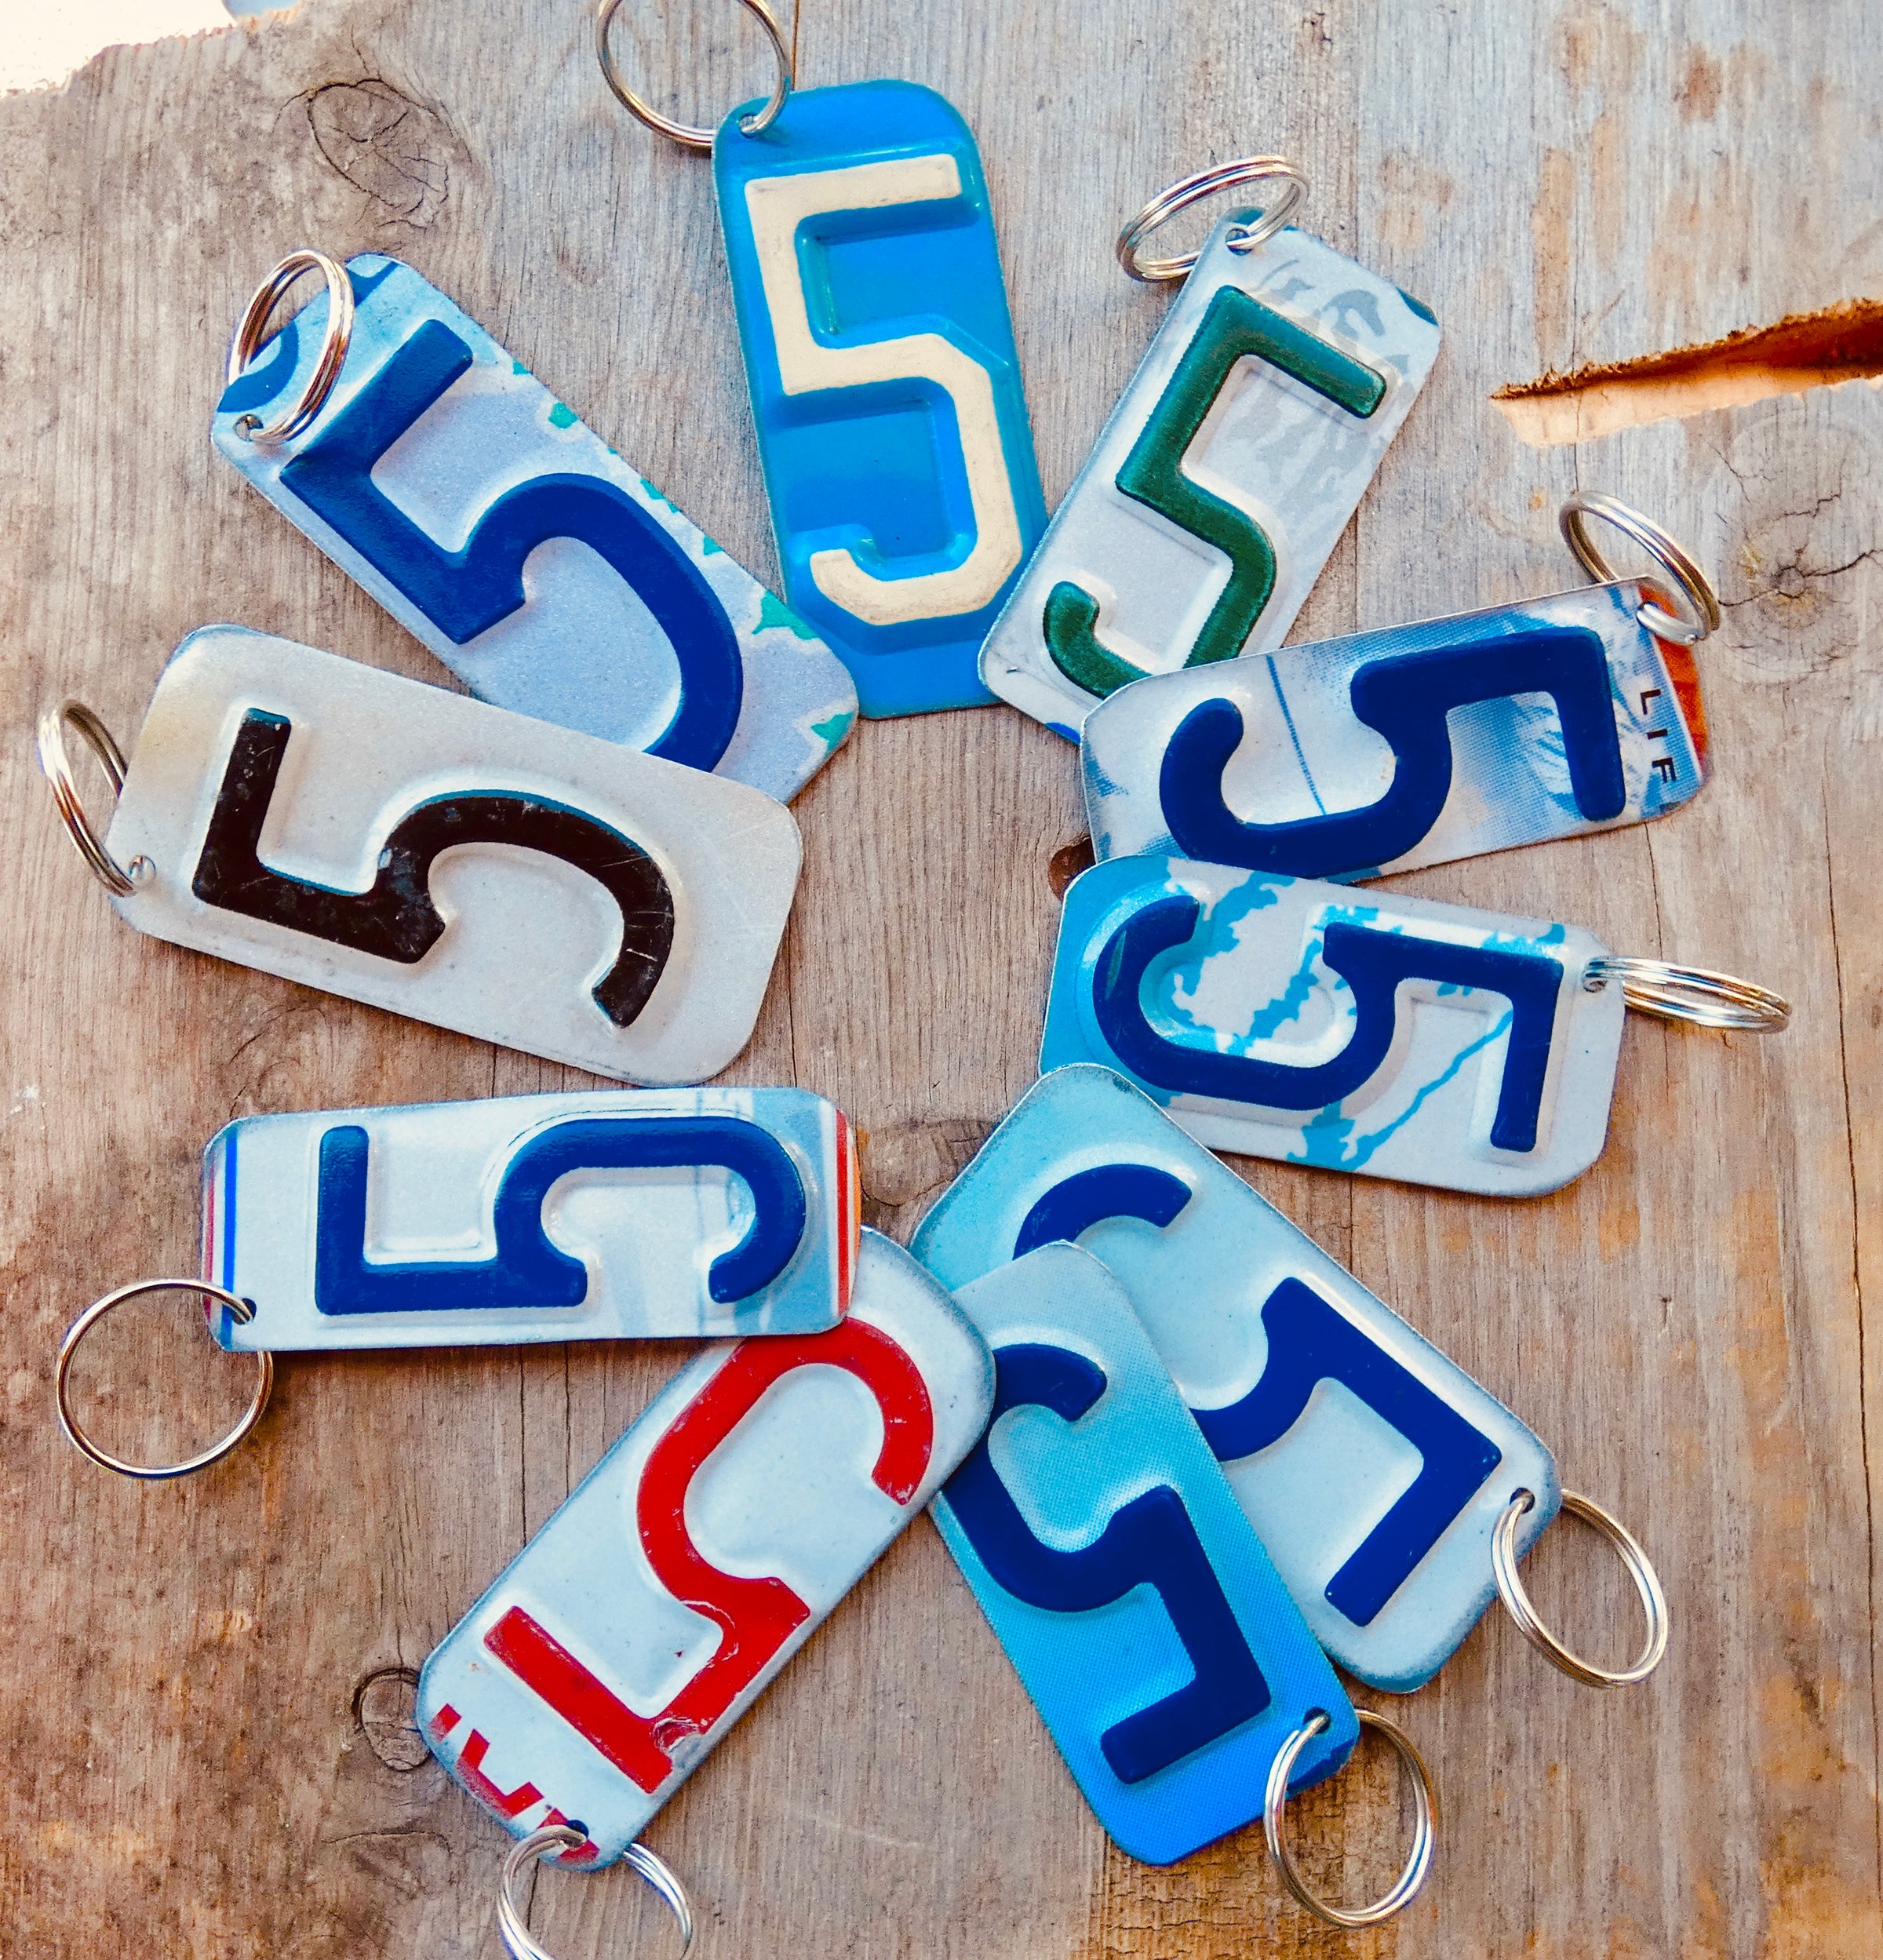 Number 1 Key Chain from repurposed License Plates